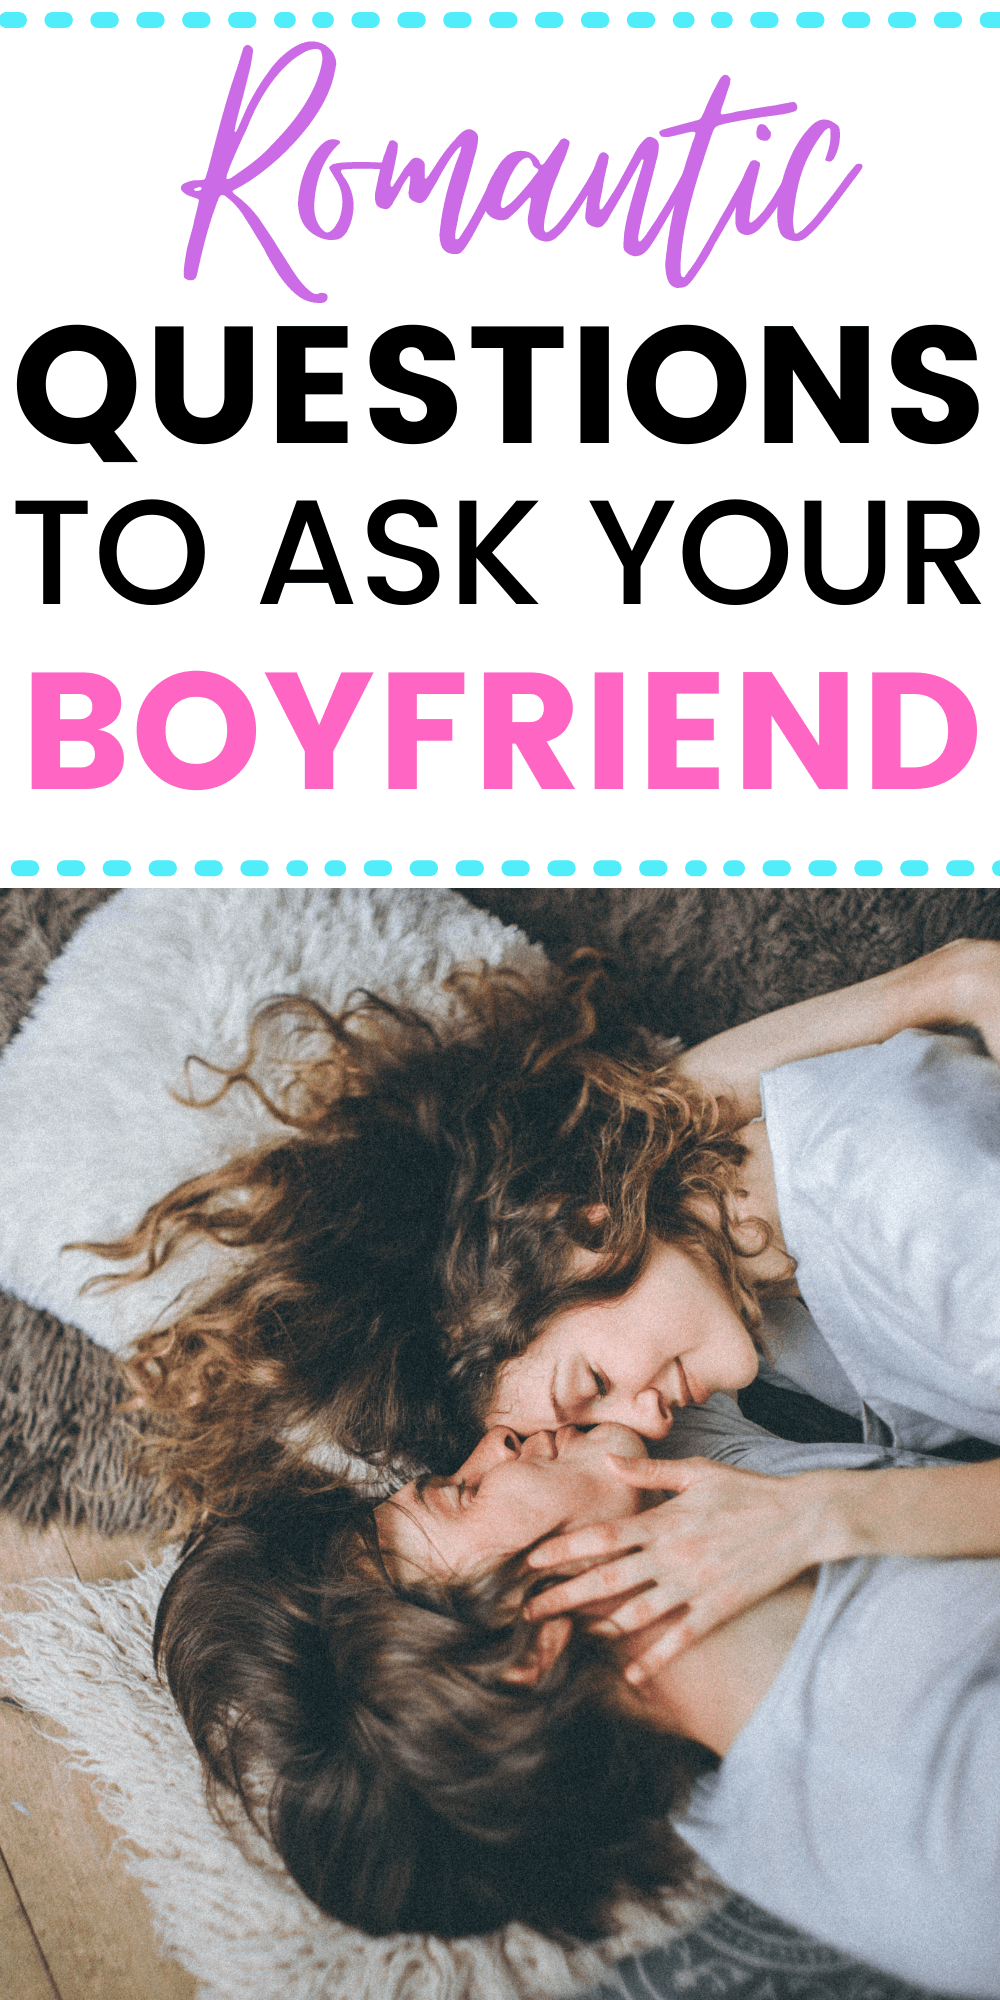 Questions to ask a boyfriend